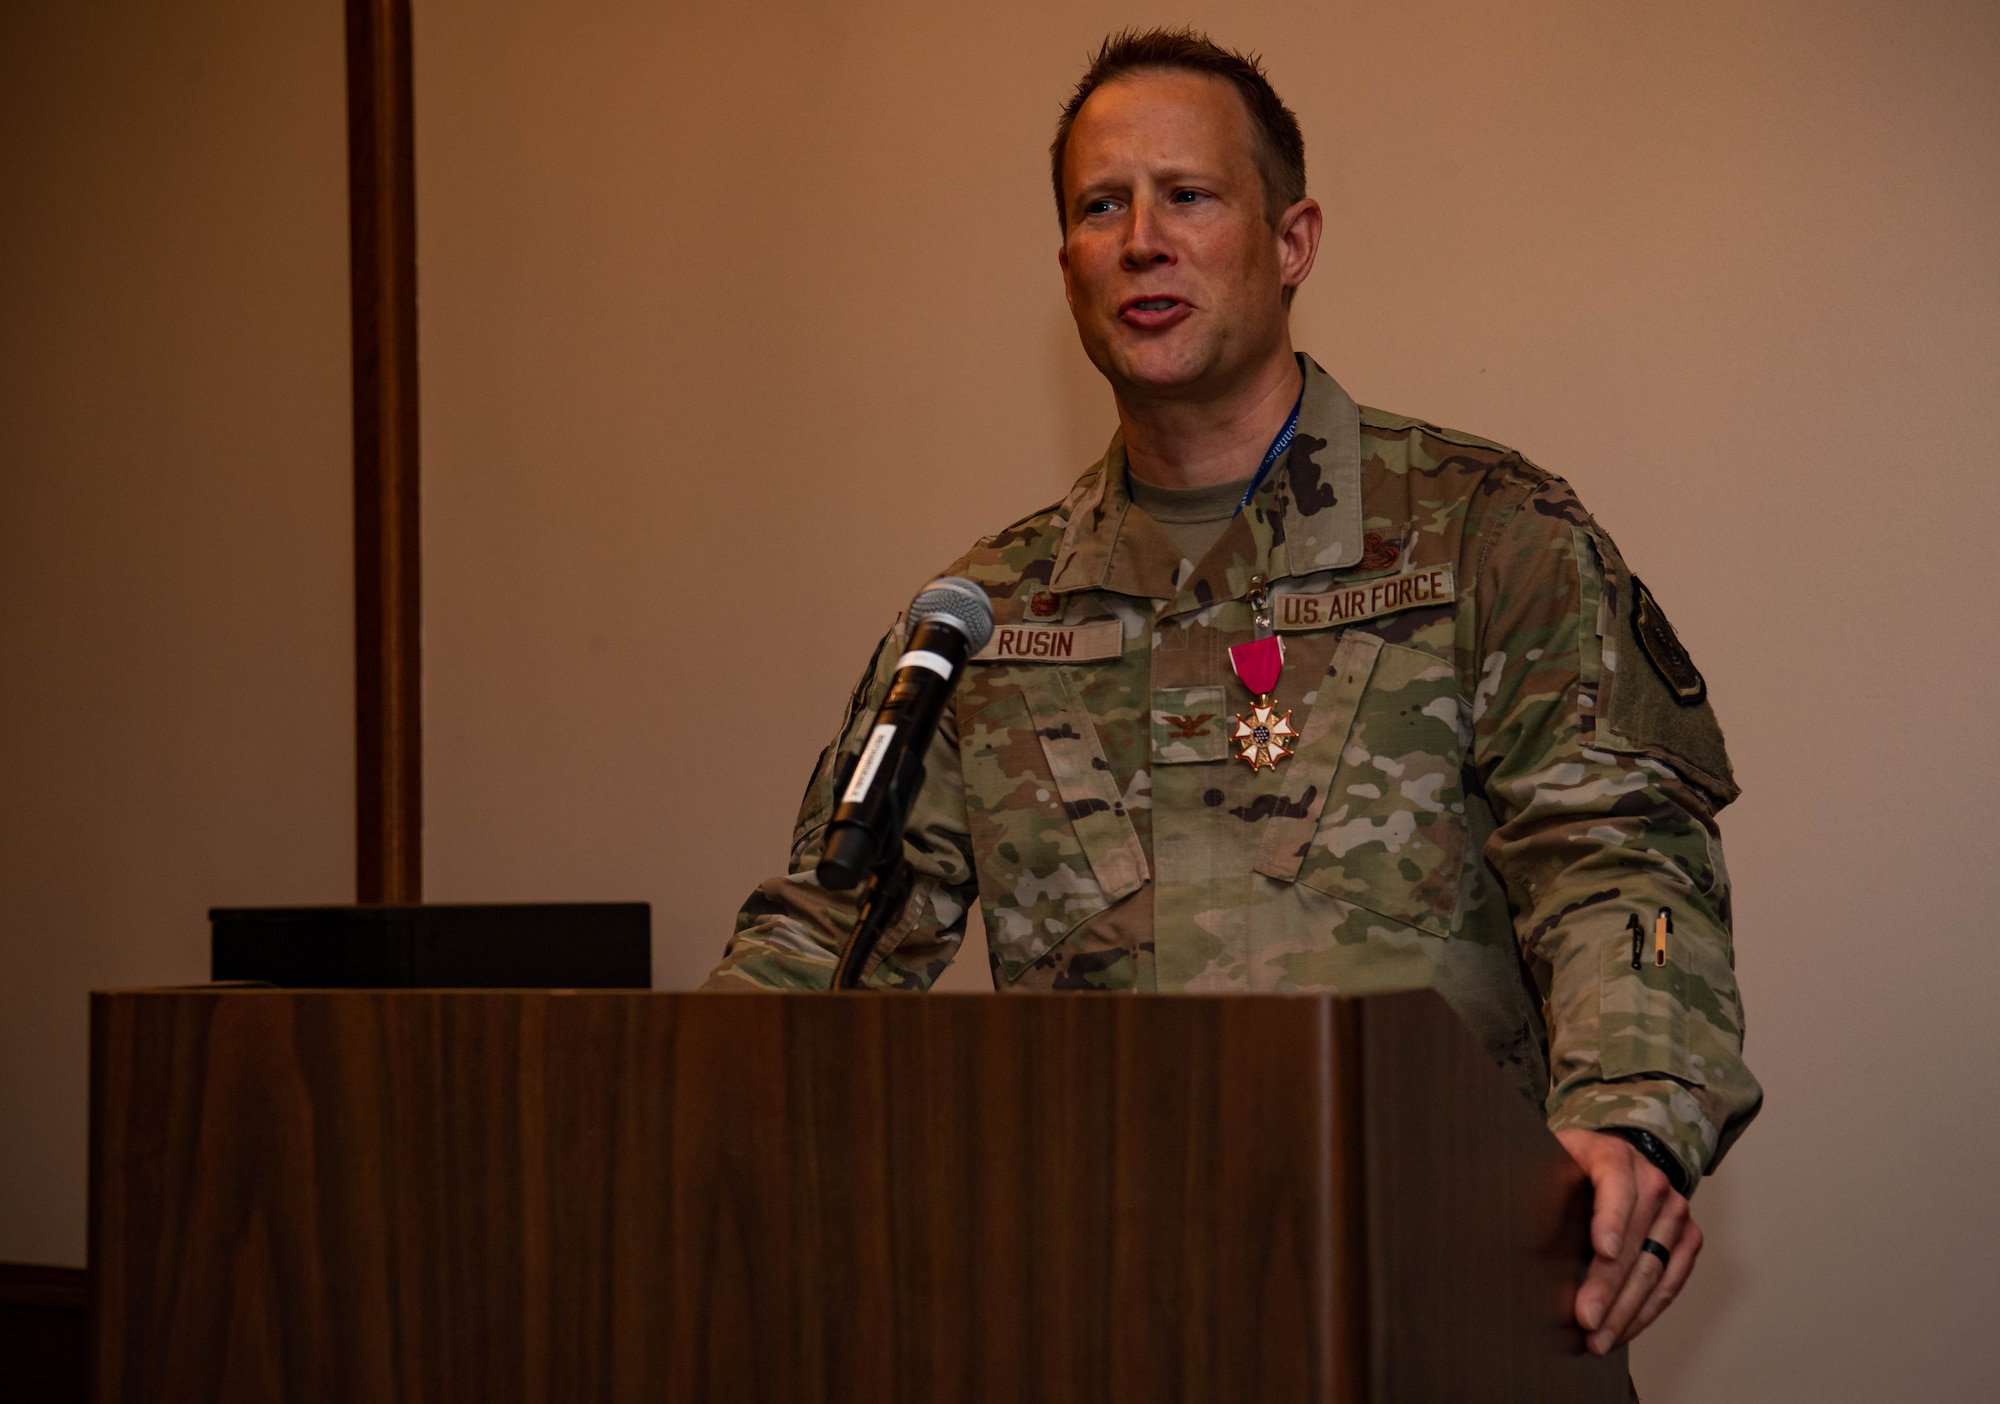 US Air Force Col Nathan Rusin, 693rd Intelligence, Surveillance and Reconnaissance Group commander, addresses his Airmen before relinquishing command during a ceremony at Ramstein Air Base, Germany, May 6, 2022. The 693rd ISRG and its 3 subordinate squadrons conduct a variety of multi-intelligence operations, providing information to three combatant commands, combat forces and national leadership. (US Air Force photo by Airman 1st Class Jared Lovett)